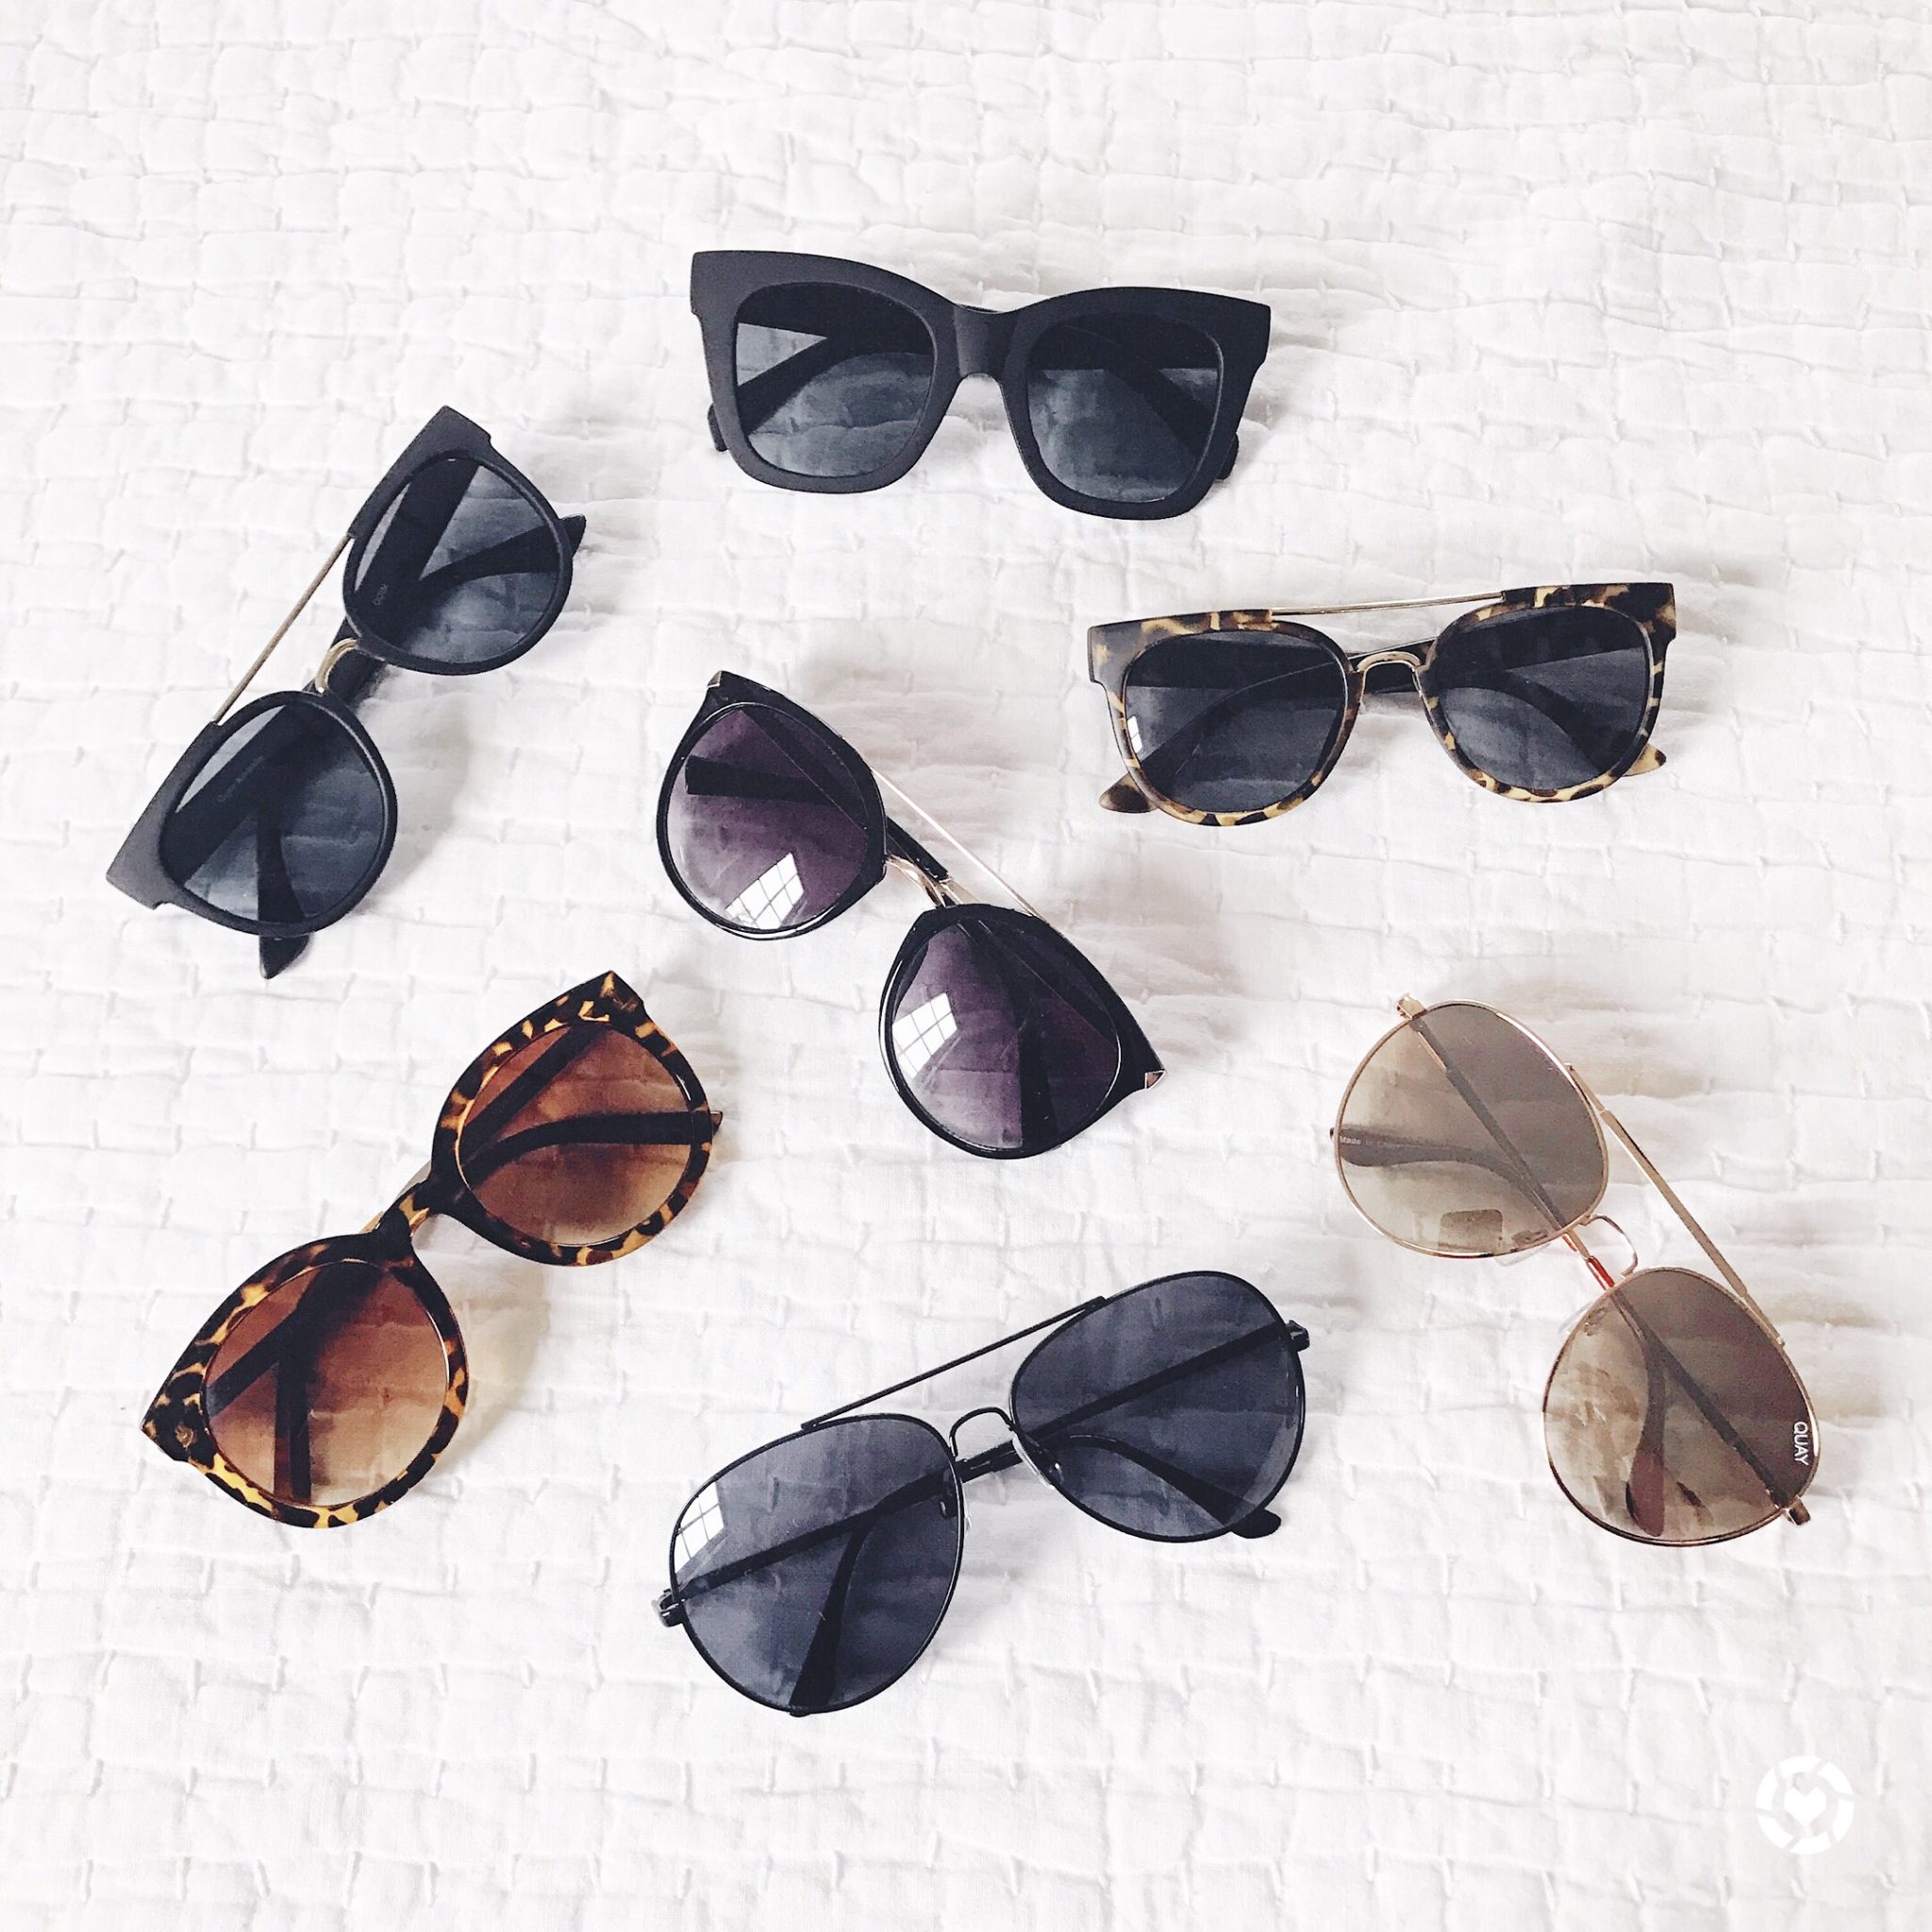 The best sunglasses under $60, The Southern Style Guide, Sunglasses, Affordable Sunglasses, Quay Sunglasses